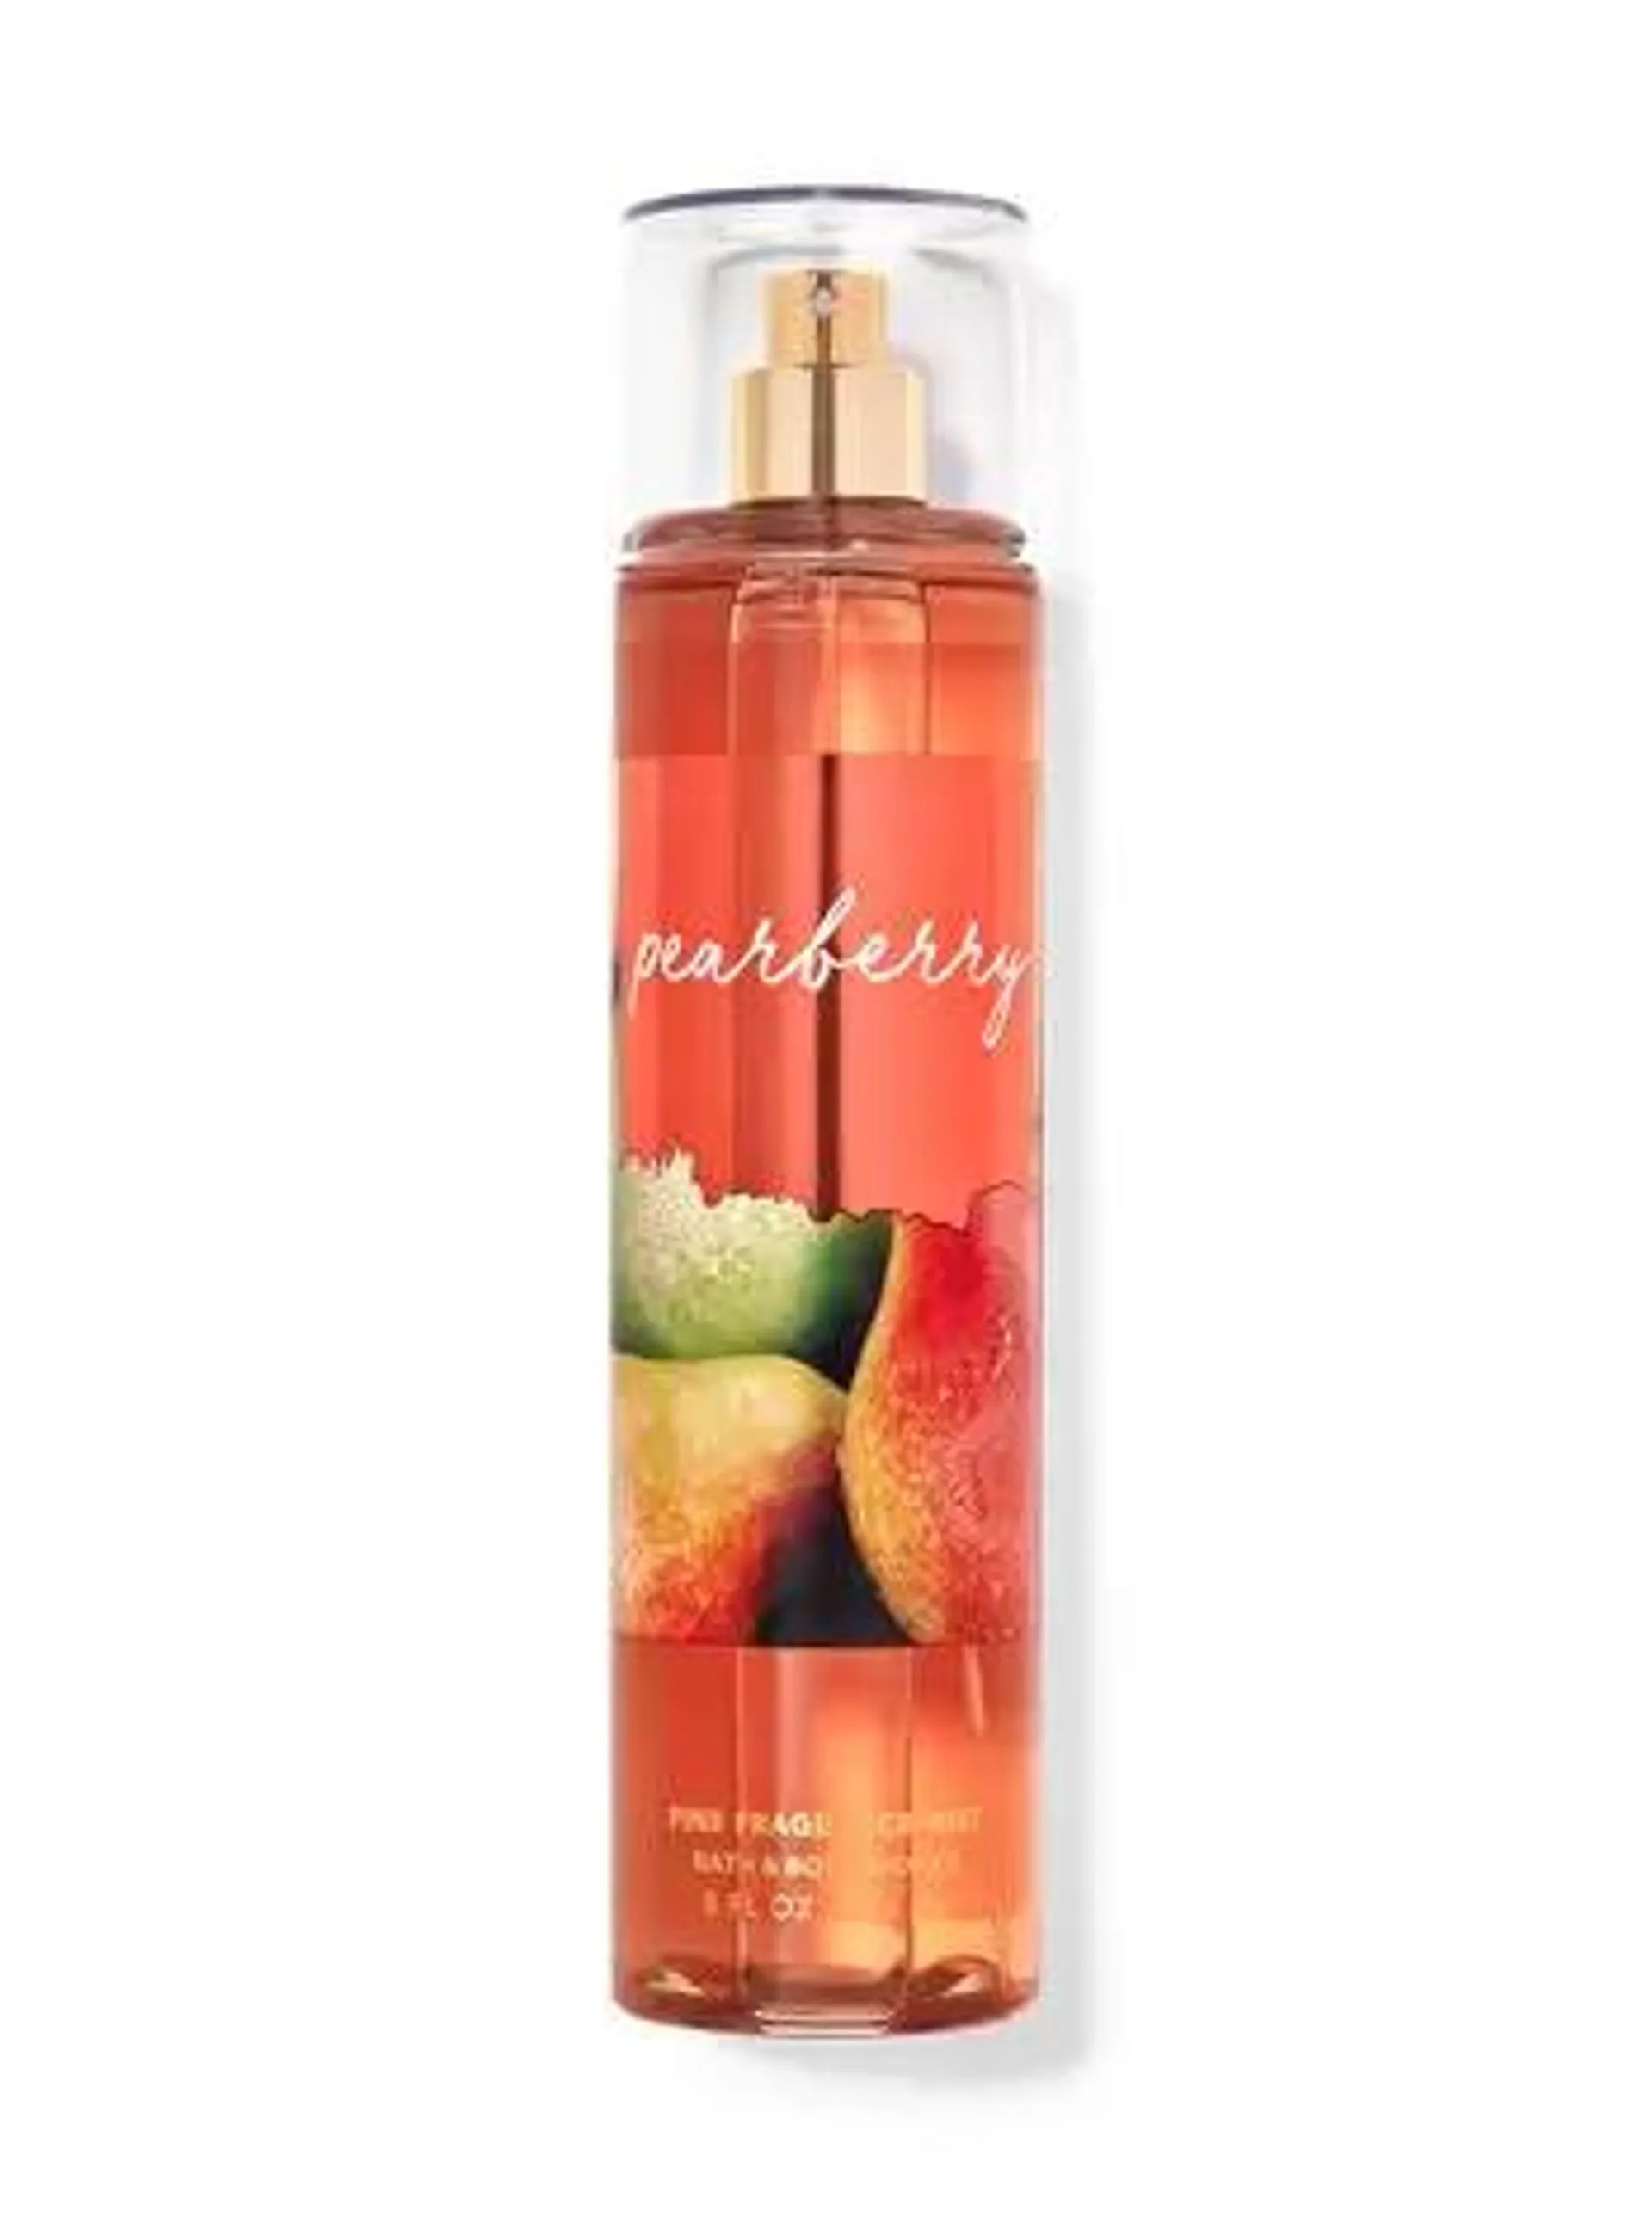 Pearberry Fine Fragrance Mist